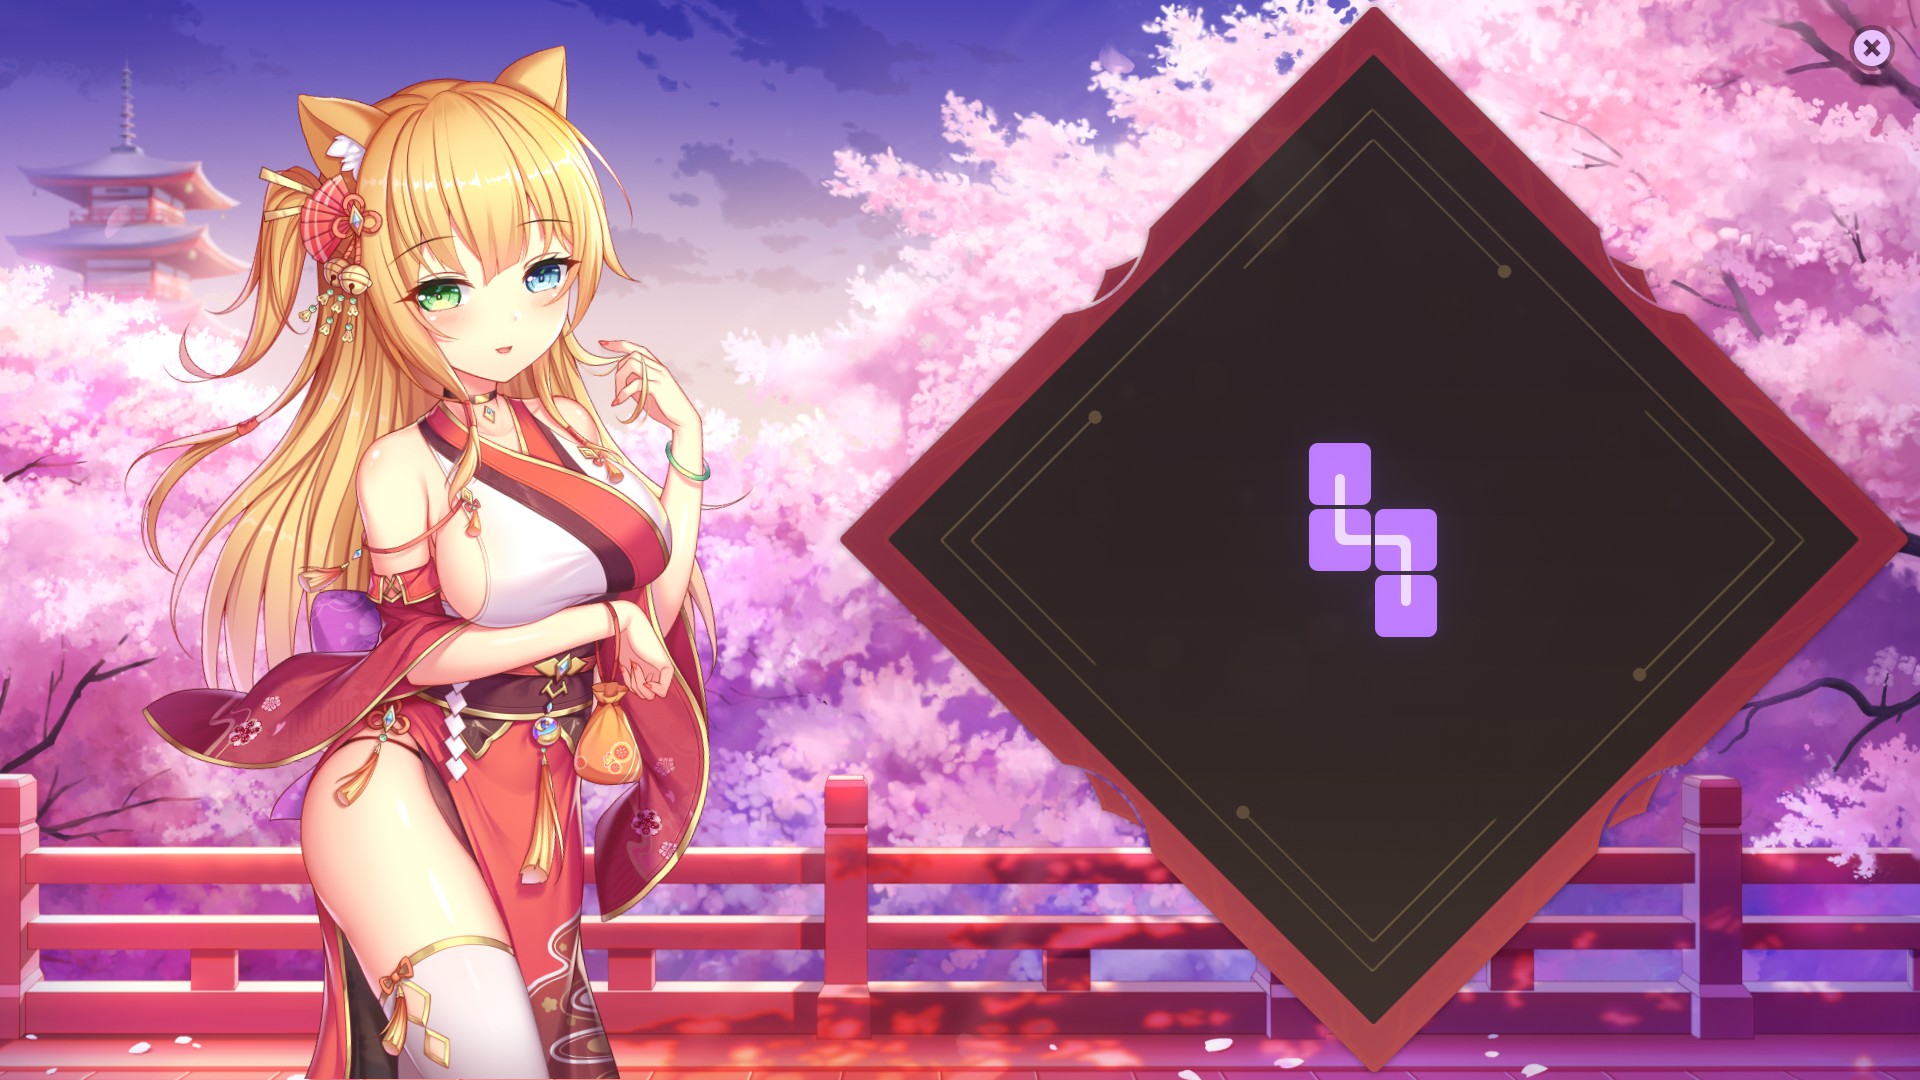 Sakura Hime 2 - Complete Achievement Guide +Walkthrough - Images of completed levels - 33B1081